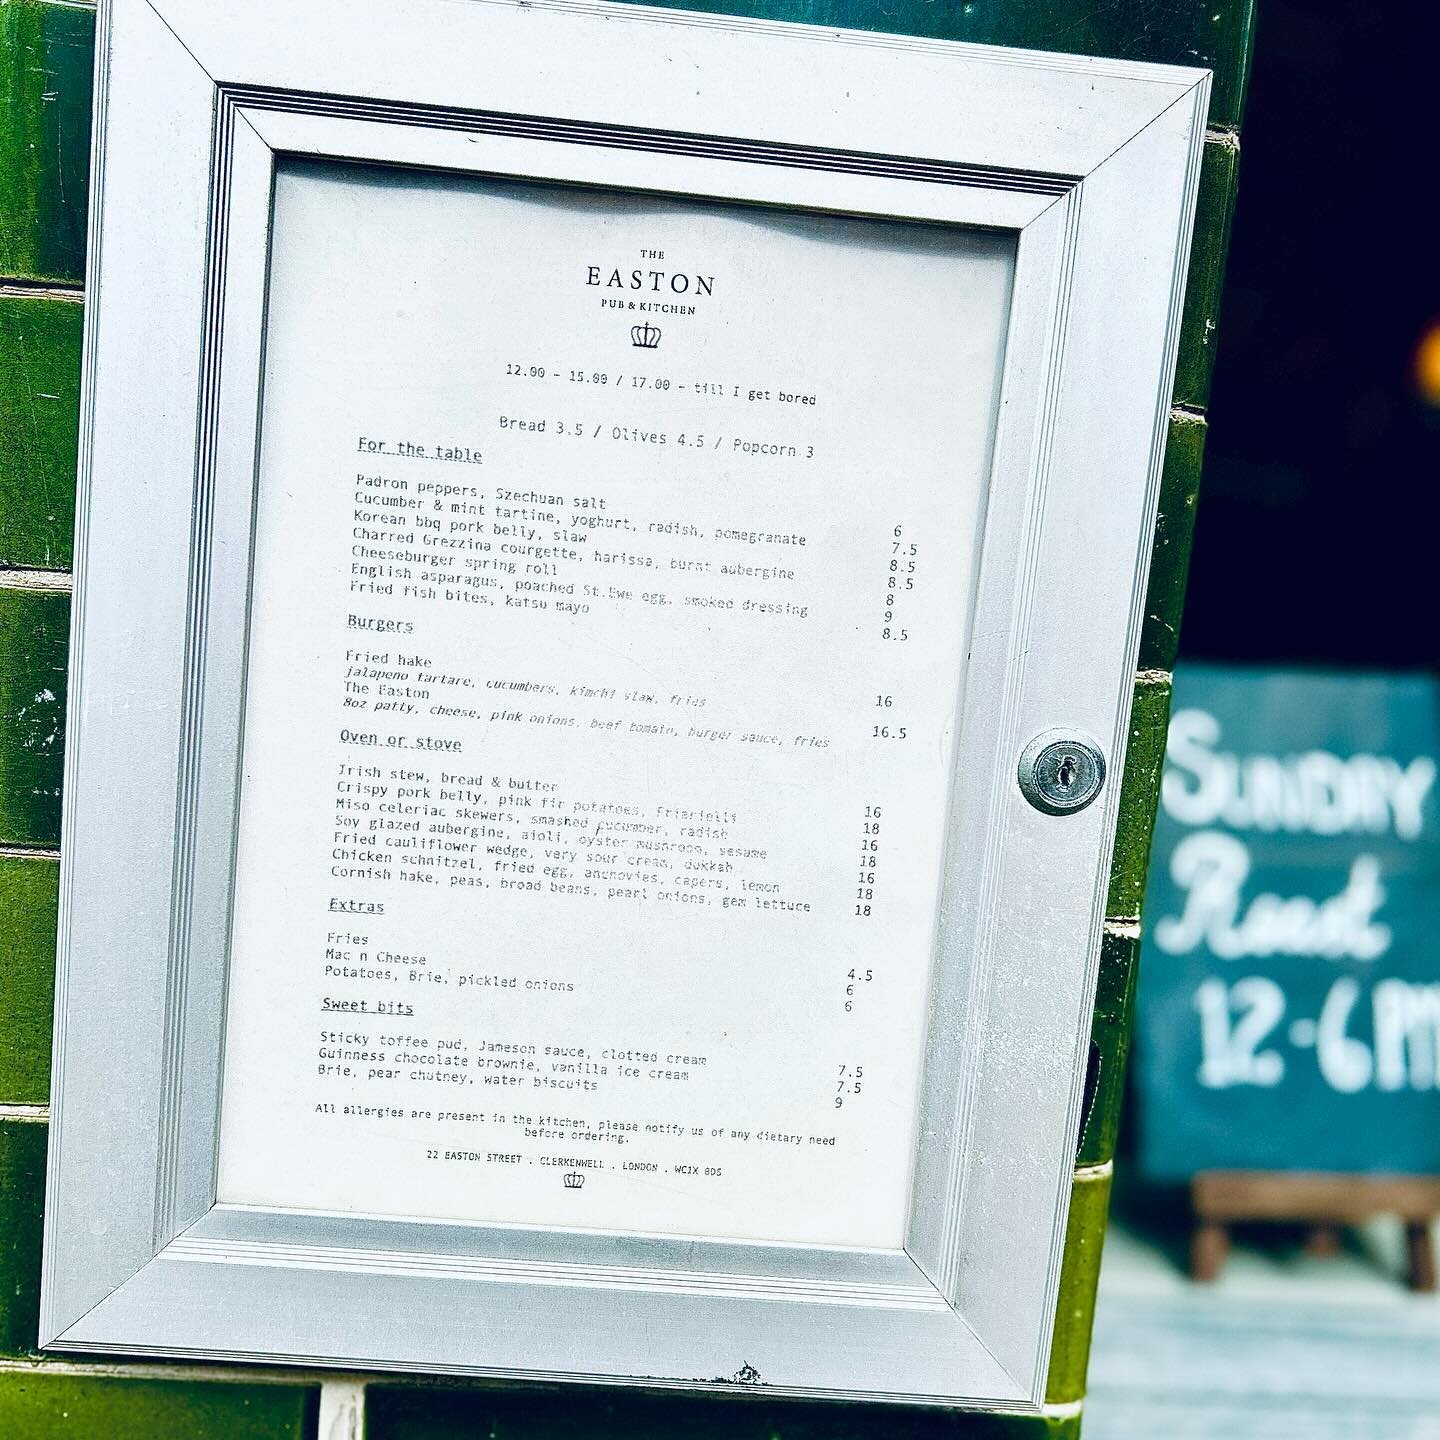 🫛NEW SPRING MENU!!

🤌We&rsquo;ve just launched the chef&rsquo;s kiss of new seasonal dishes to reflect Spring having sprung at The Easton!

👀SWIPE to see some of the delights on offer for lunch &amp; dinner (Tuesday to Saturday) - we&rsquo;re talk